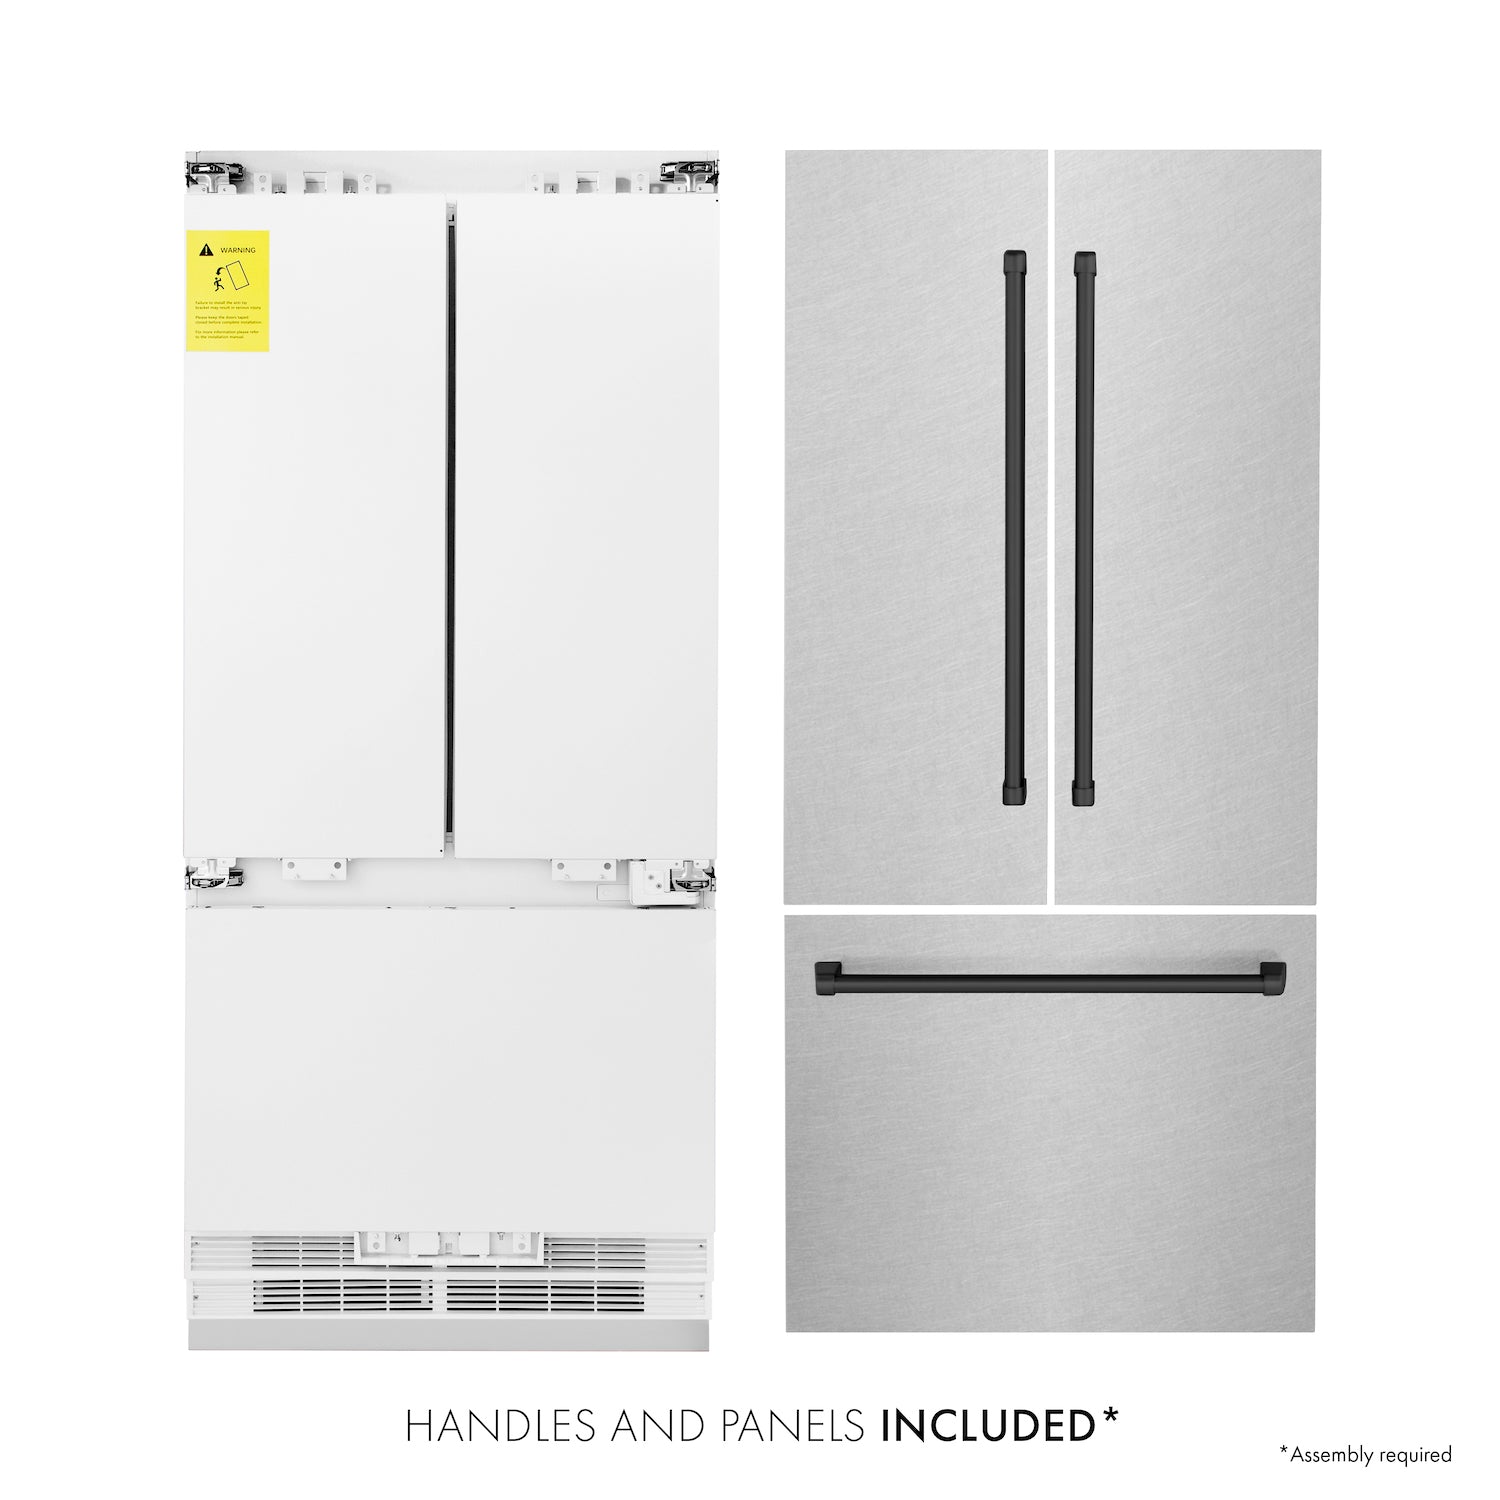 ZLINE Autograph Edition 36 in. 19.6 cu. ft. Built-in 2-Door Bottom Freezer Refrigerator with Internal Water and Ice Dispenser in Fingerprint Resistant Stainless Steel with Matte Black Accents (RBIVZ-SN-36-MB) front, refrigeration unit, panels, and handles separated .